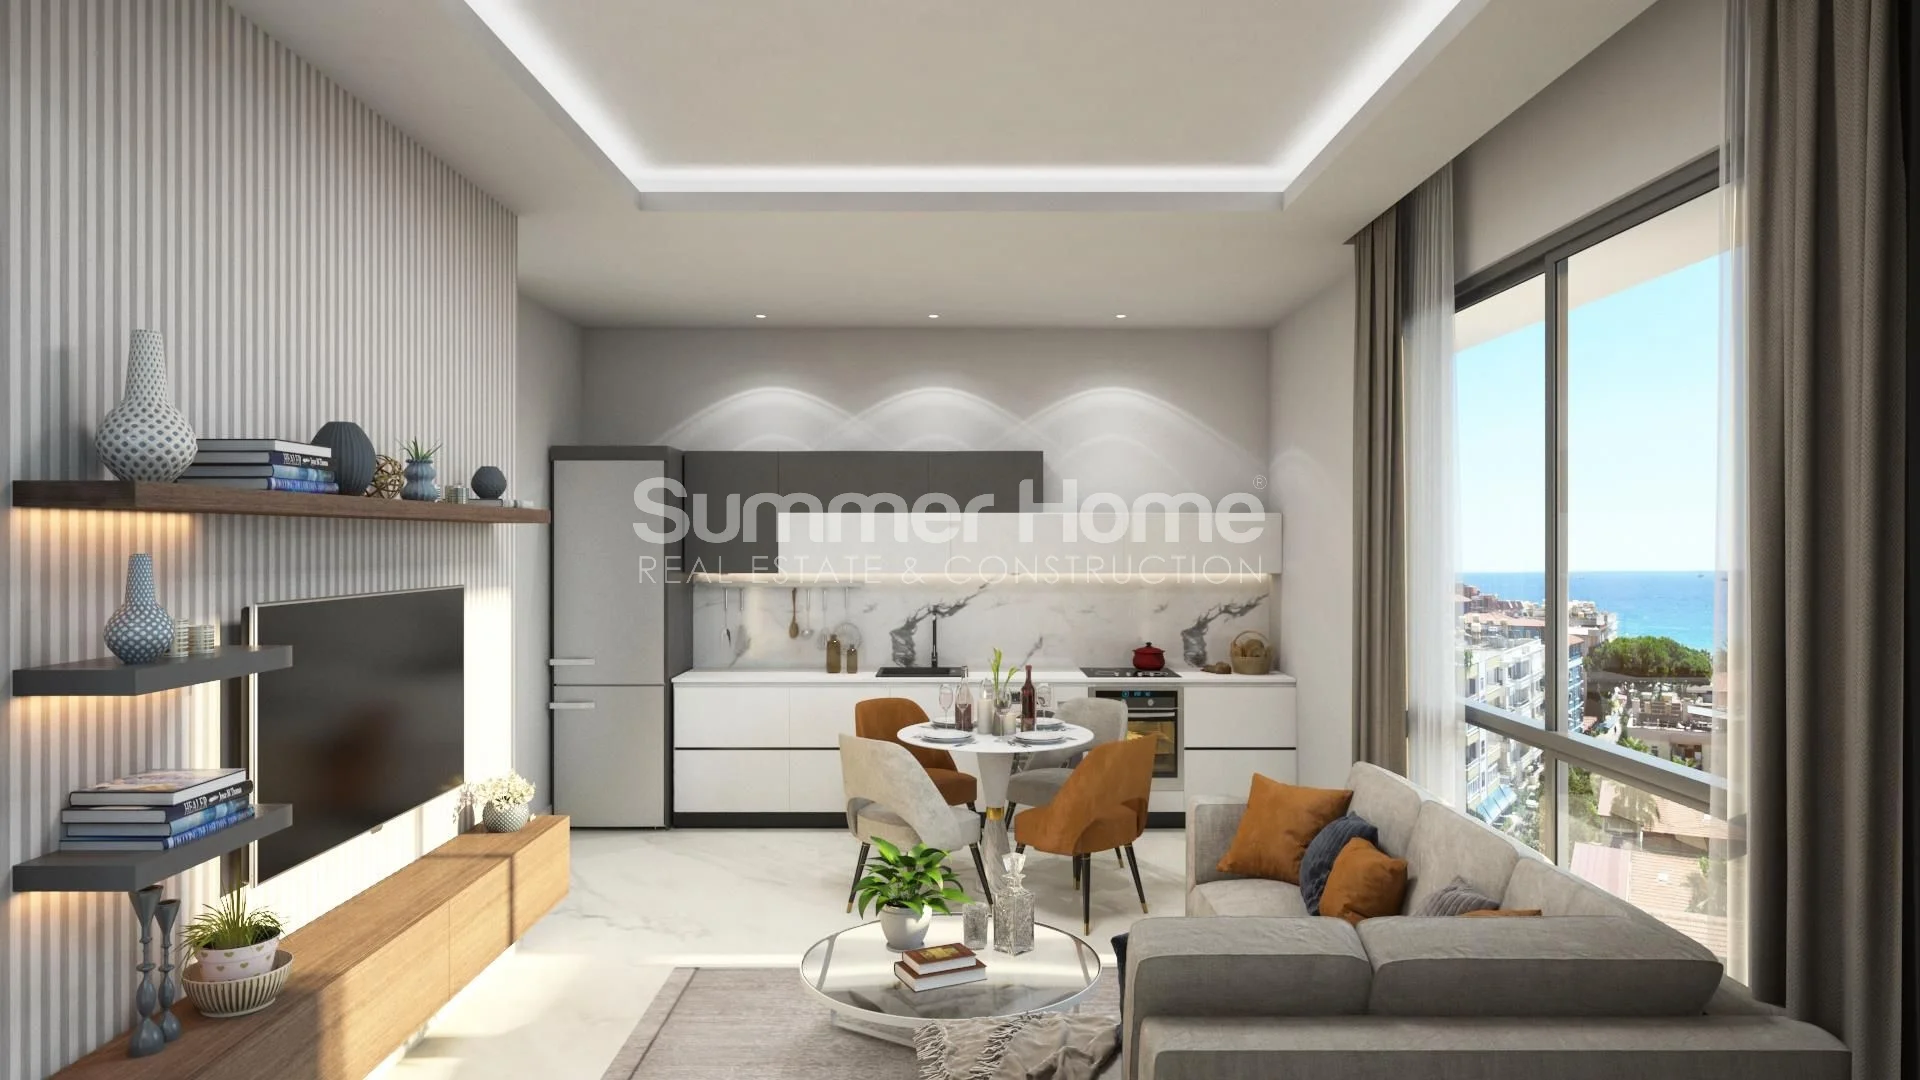 Chic and sleek apartments centrally located in Alanya Interior - 13